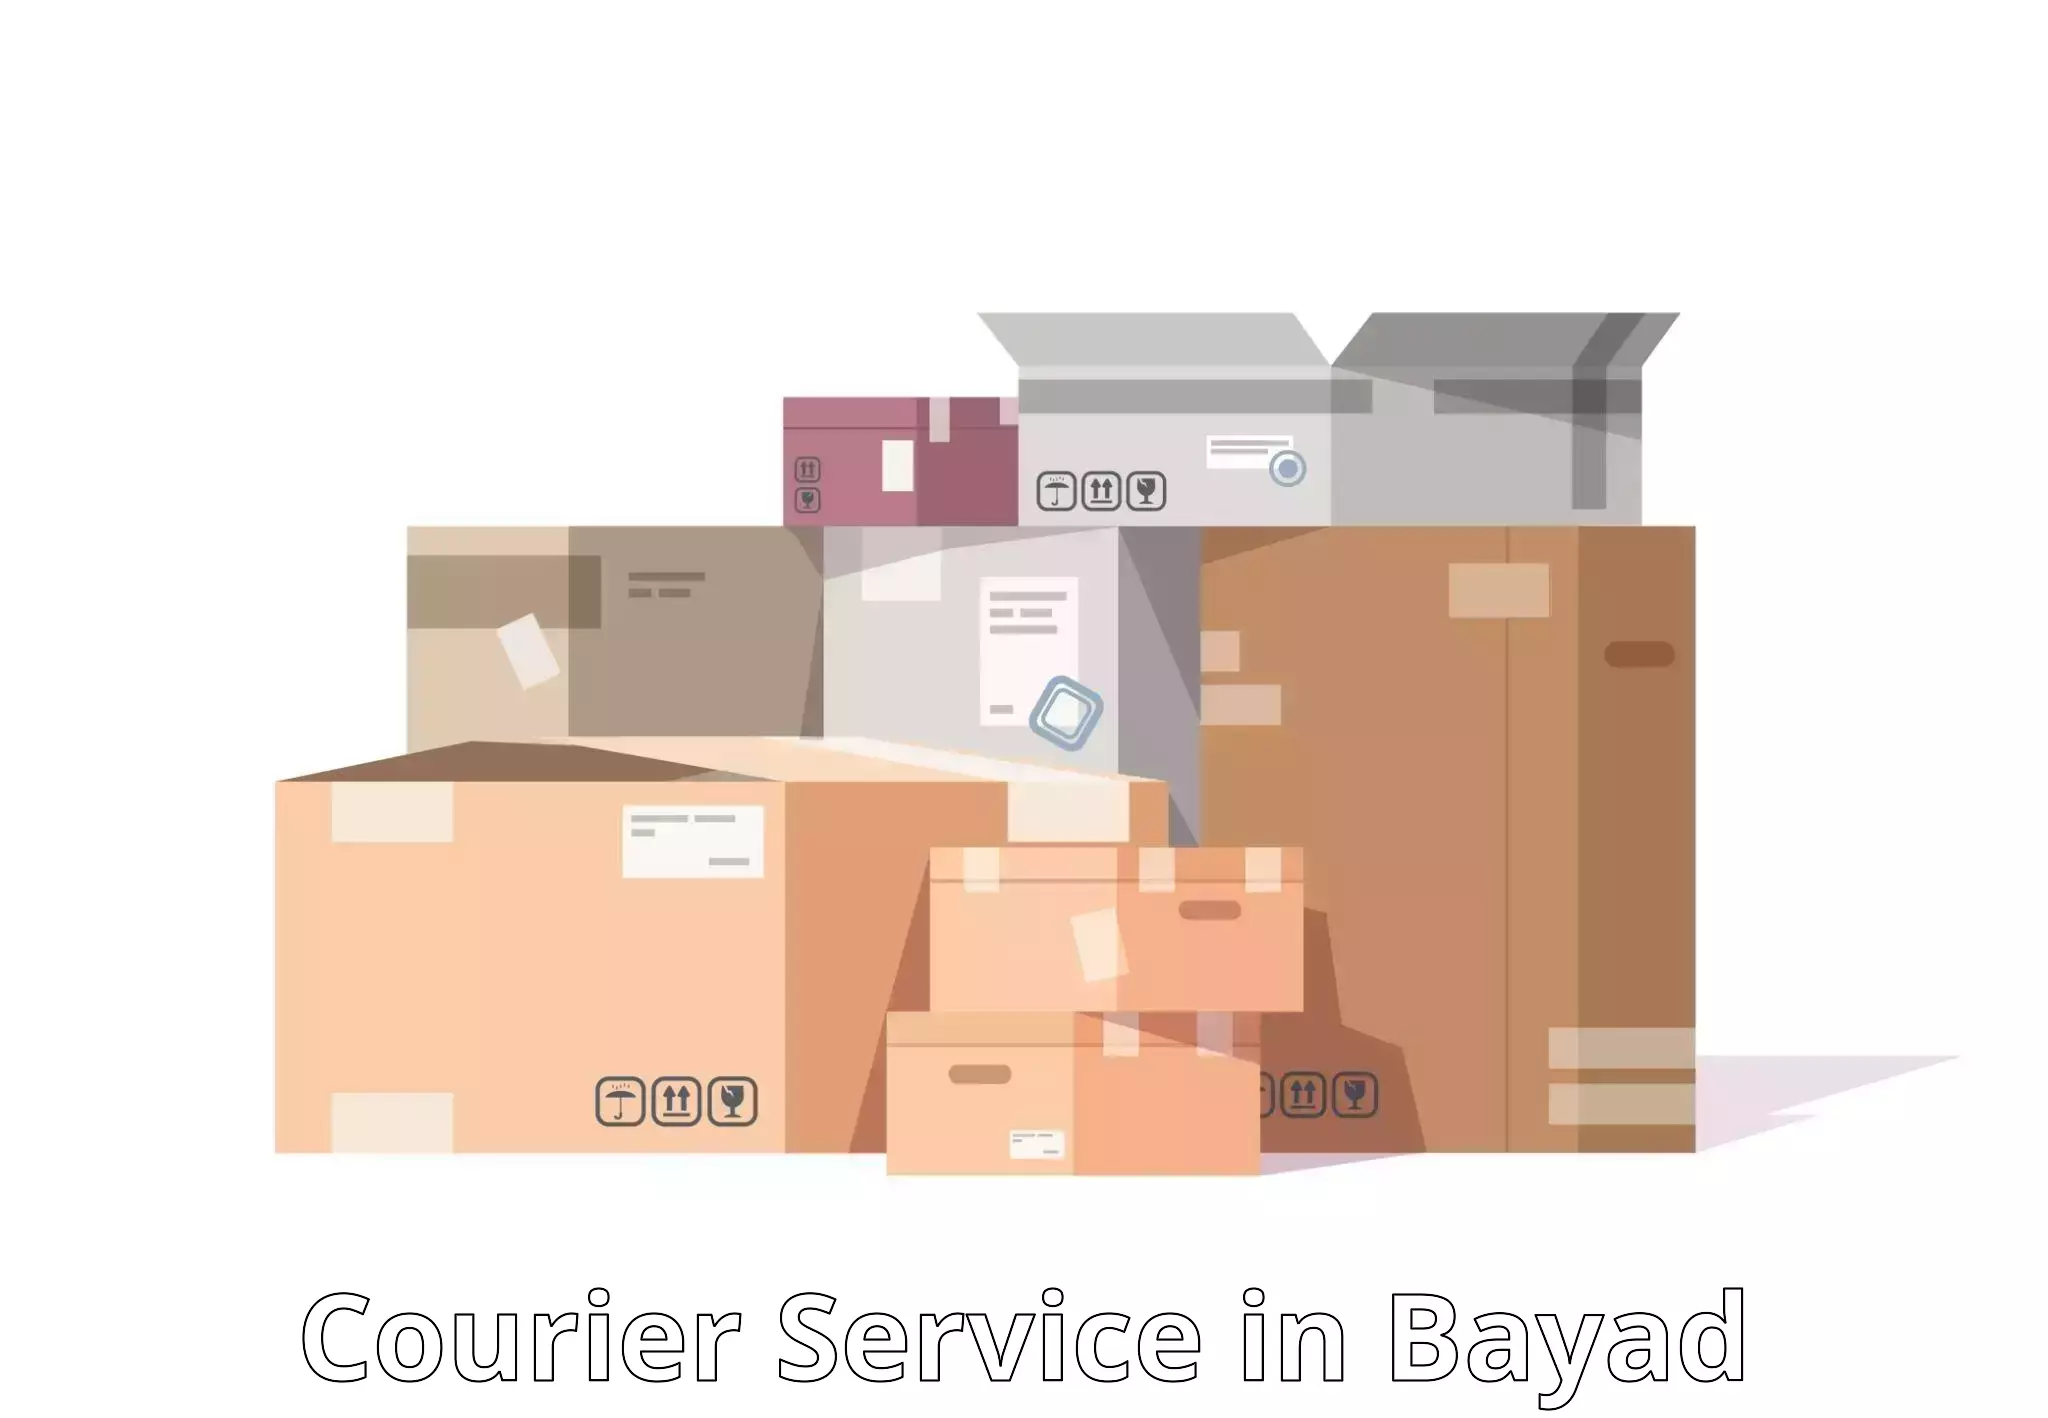 Parcel delivery automation in Bayad